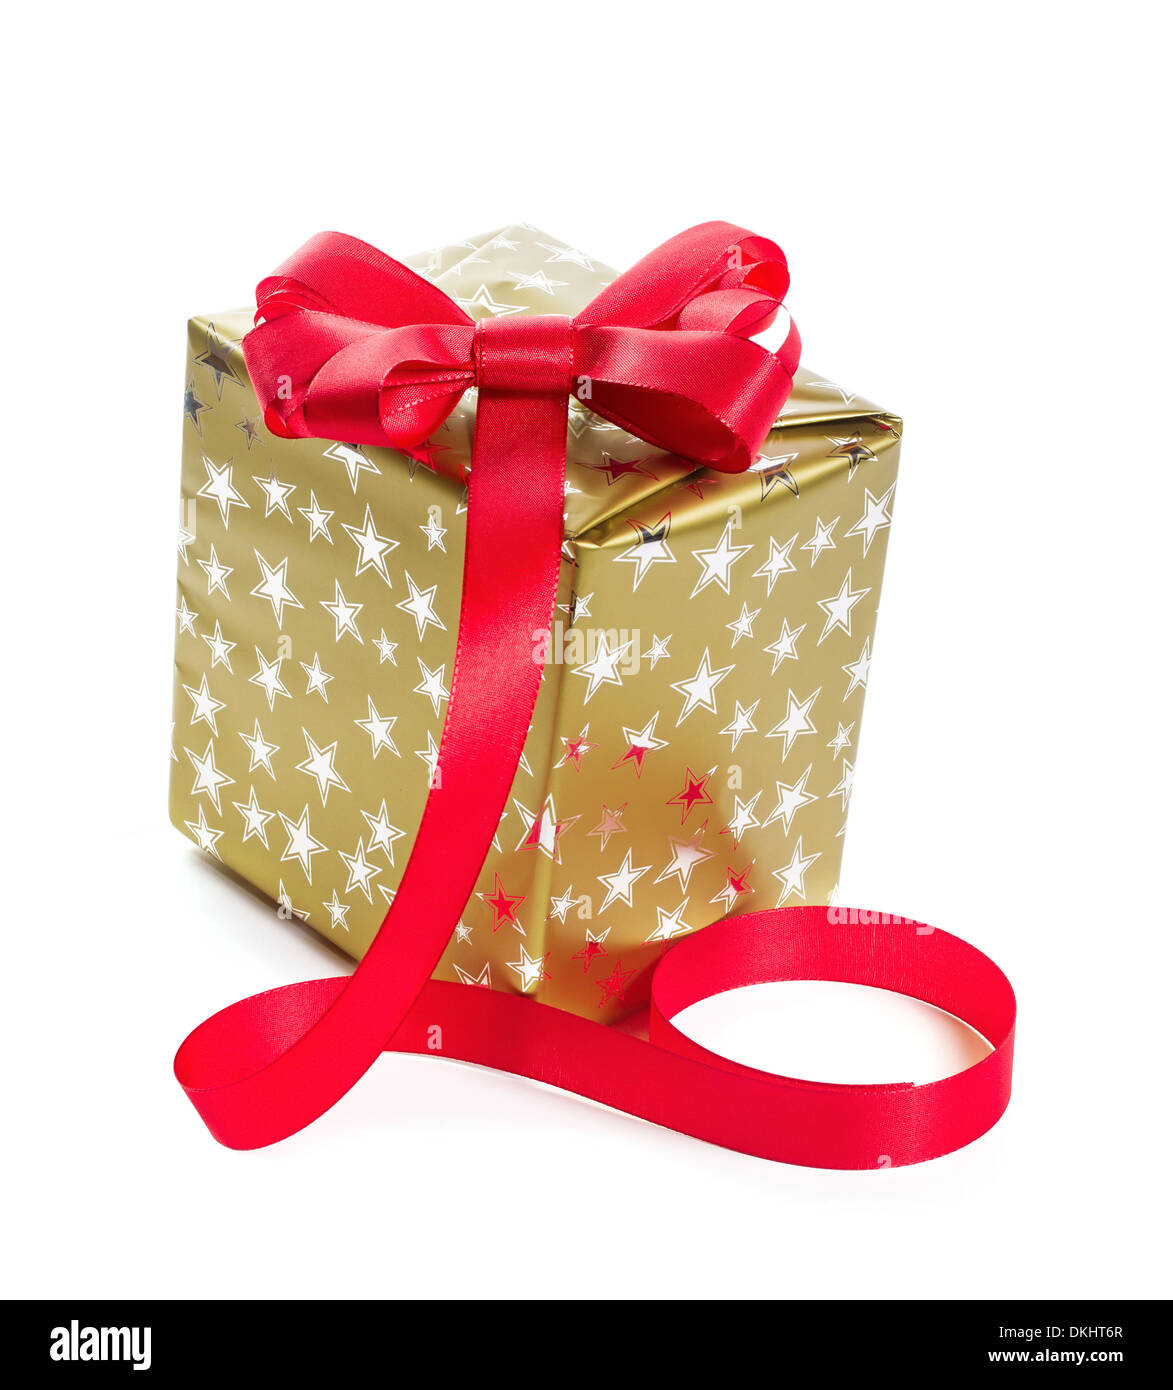 Gift in gold box with a red bow. Isolate on white background Stock Photo